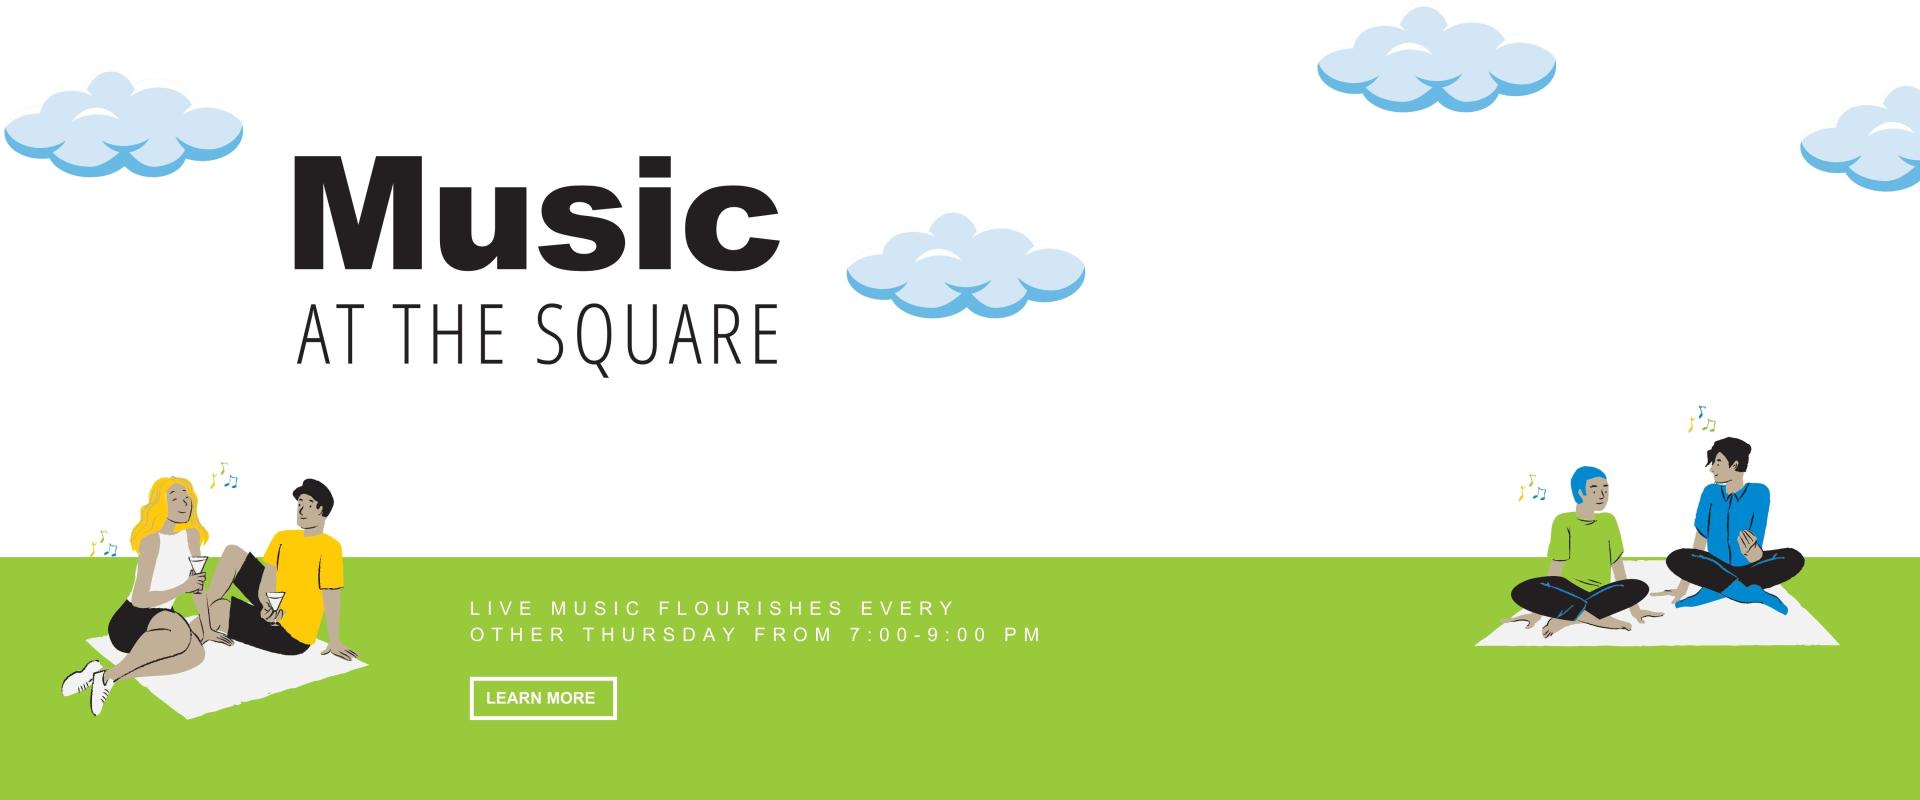 this graphic is a colorful illustration of people sitting and chatting that says music at the square with a button to learn more